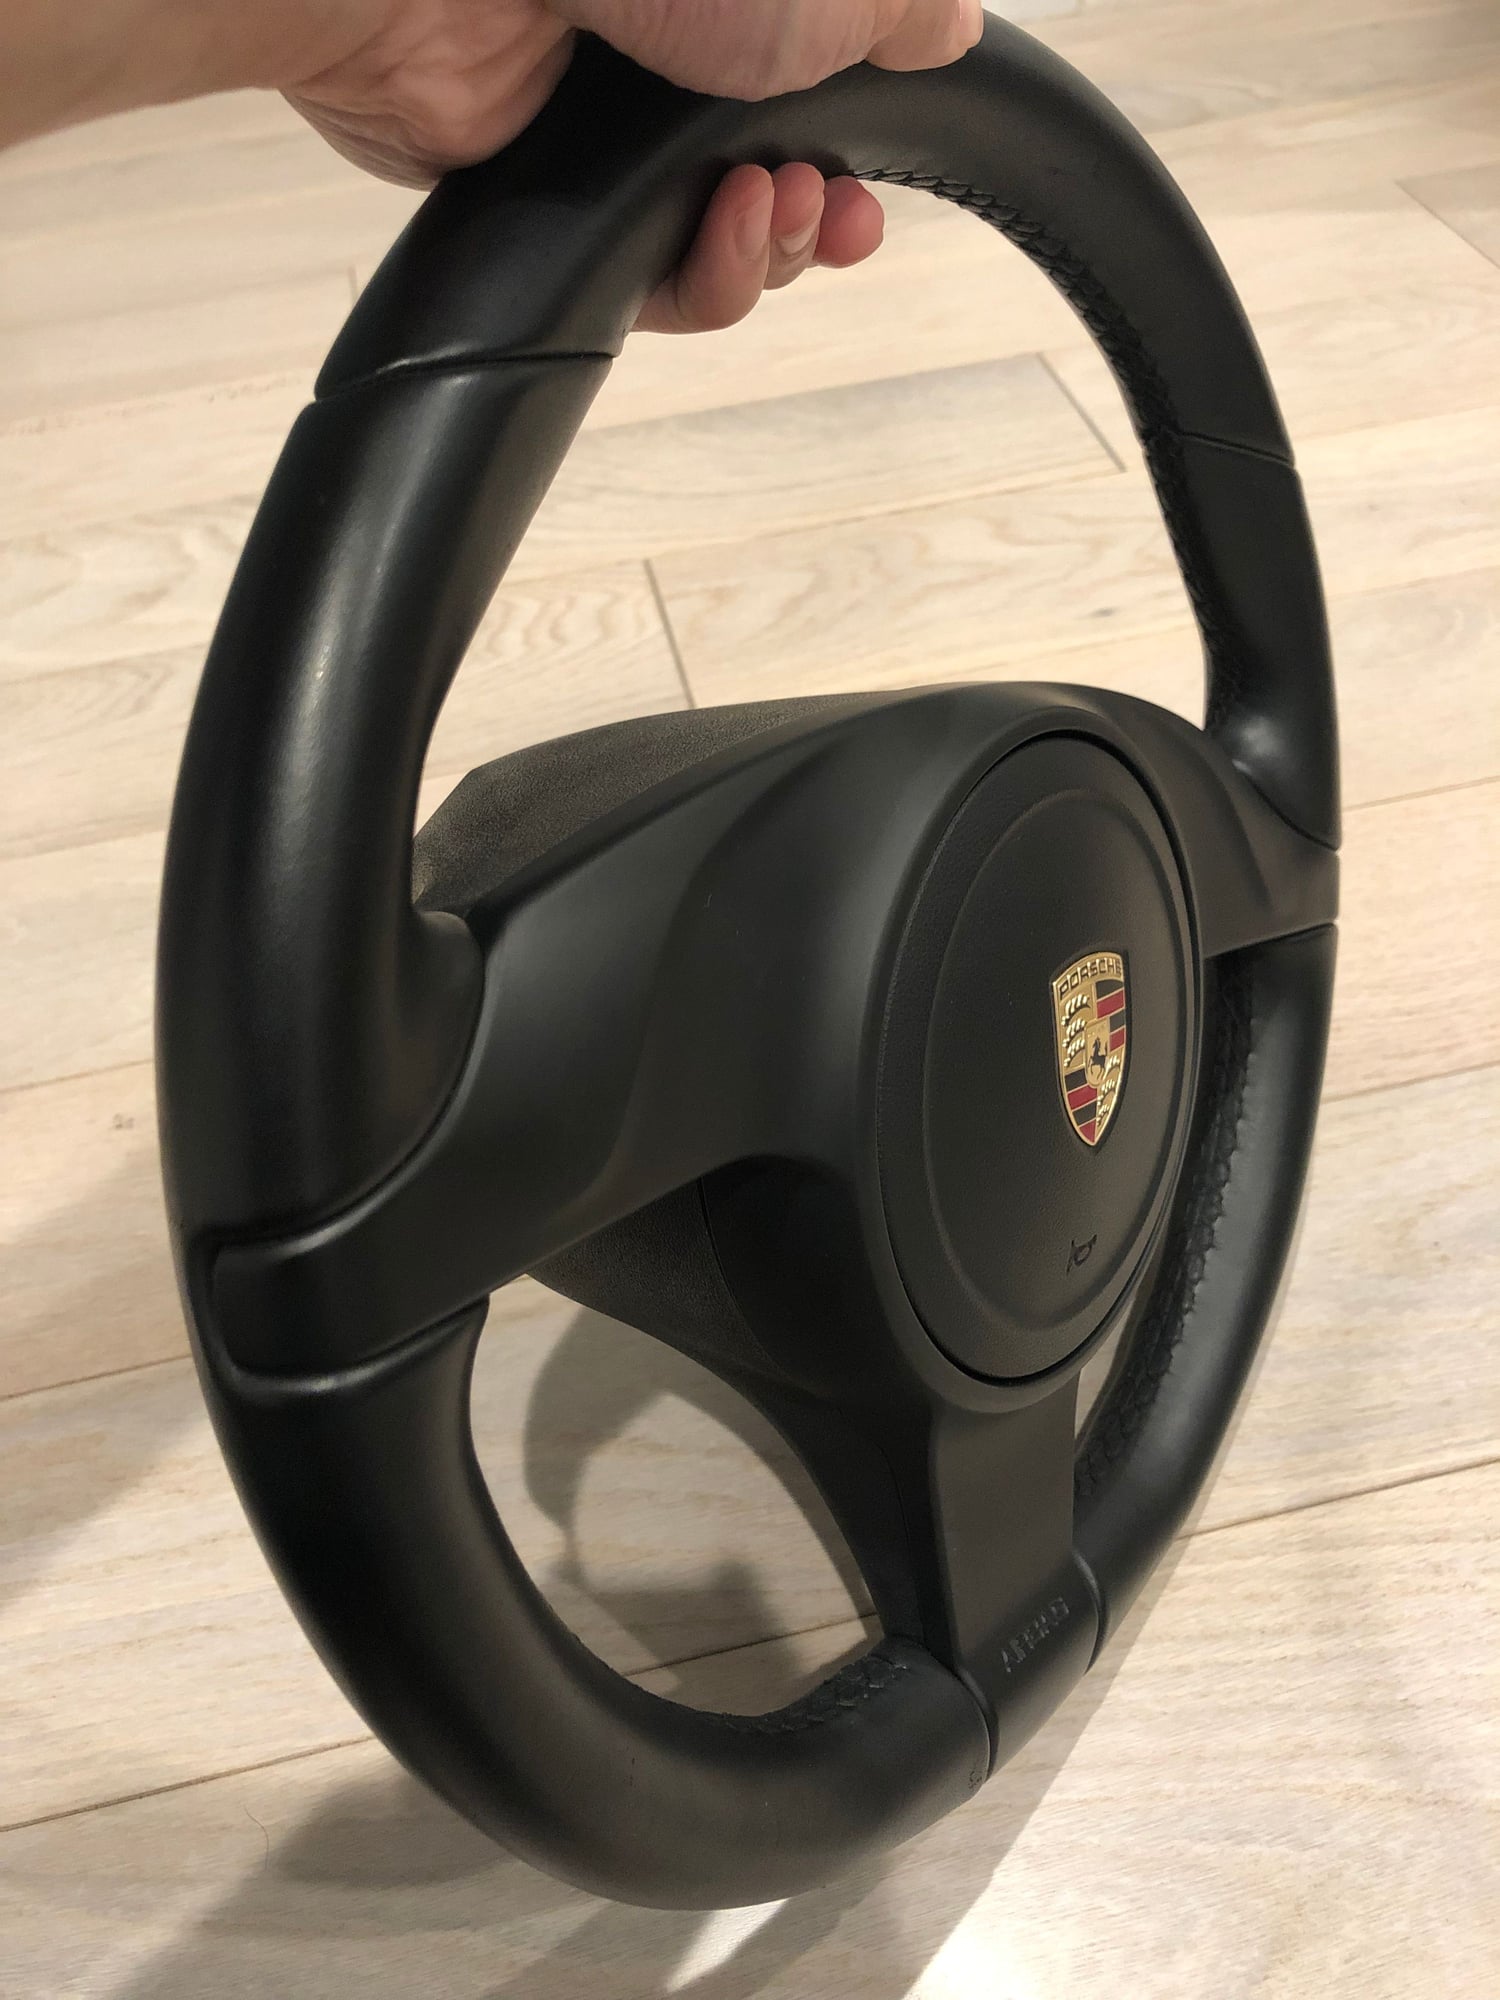 Steering/Suspension - F/S 2011 911 GT3 RS Steering Wheel & Air Bag - Used - 2005 to 2012 Porsche 911 - Queens, NY 11355, United States